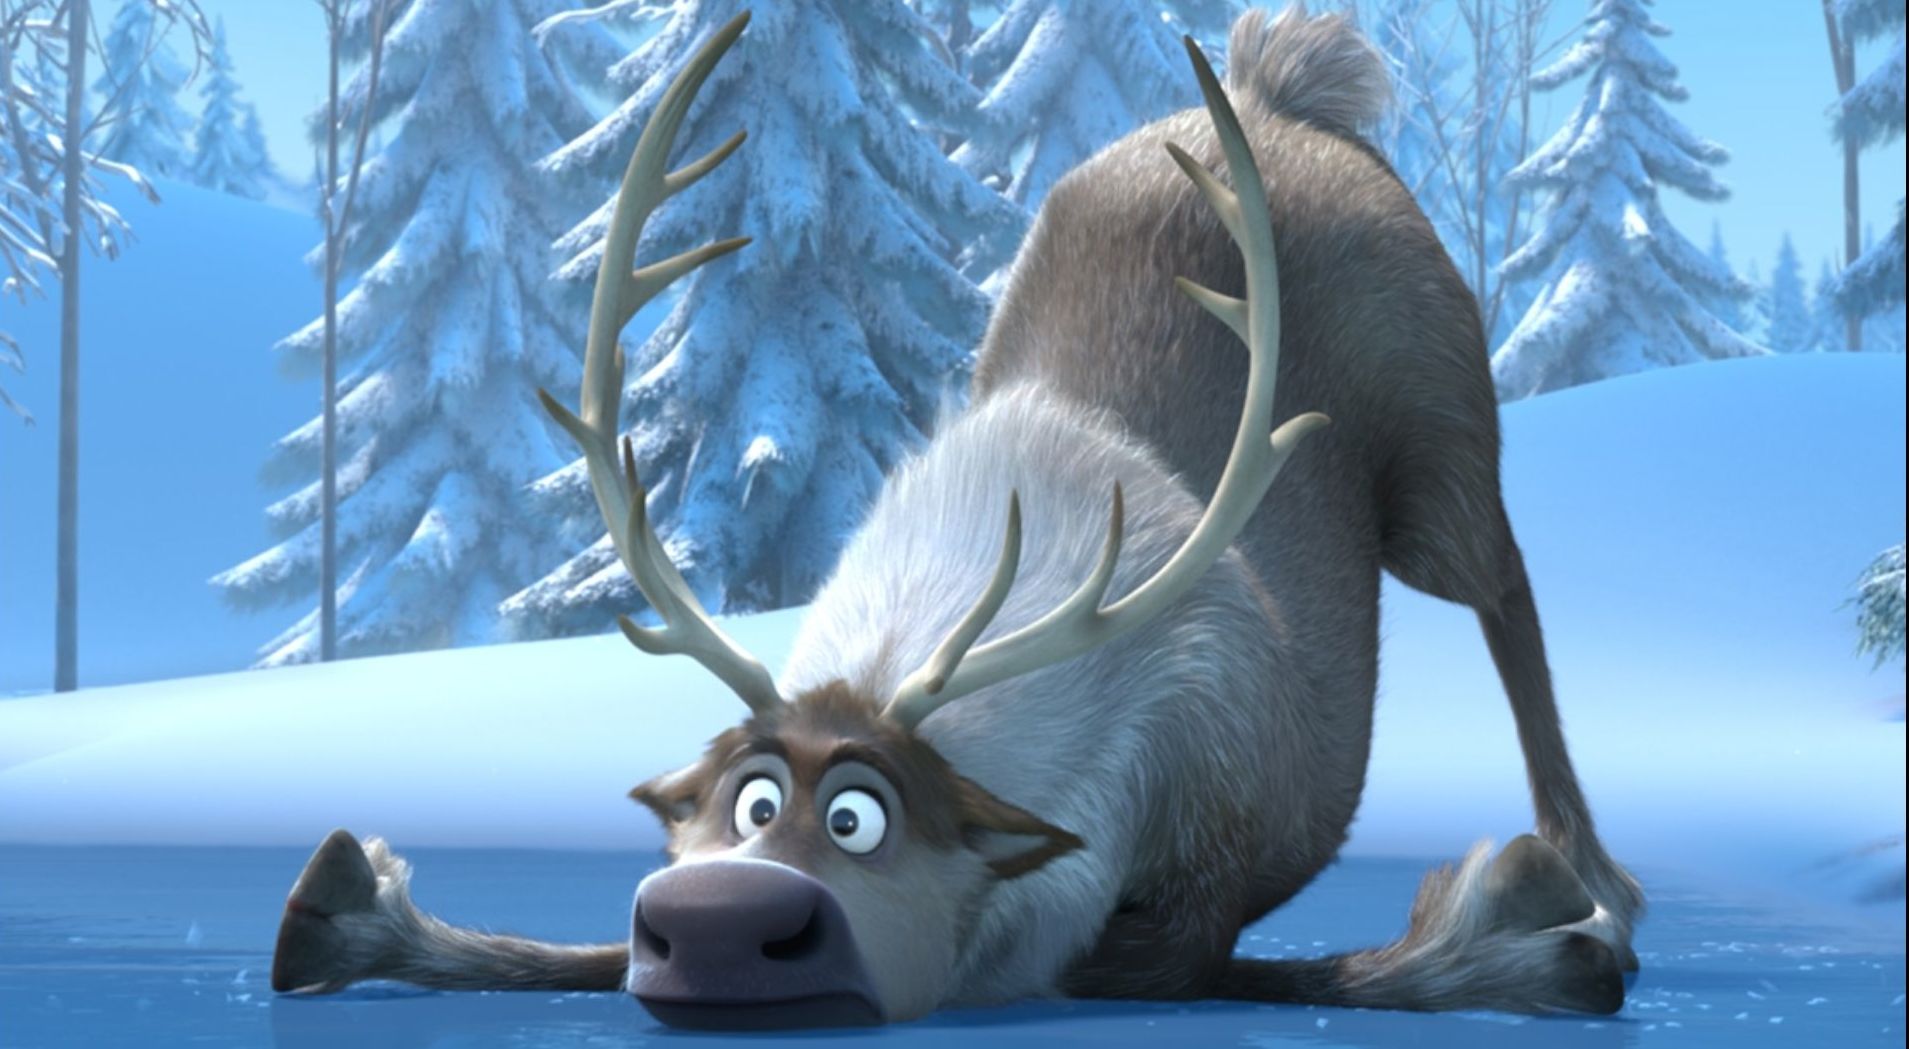 How Frozen Should Have Ended [Video]